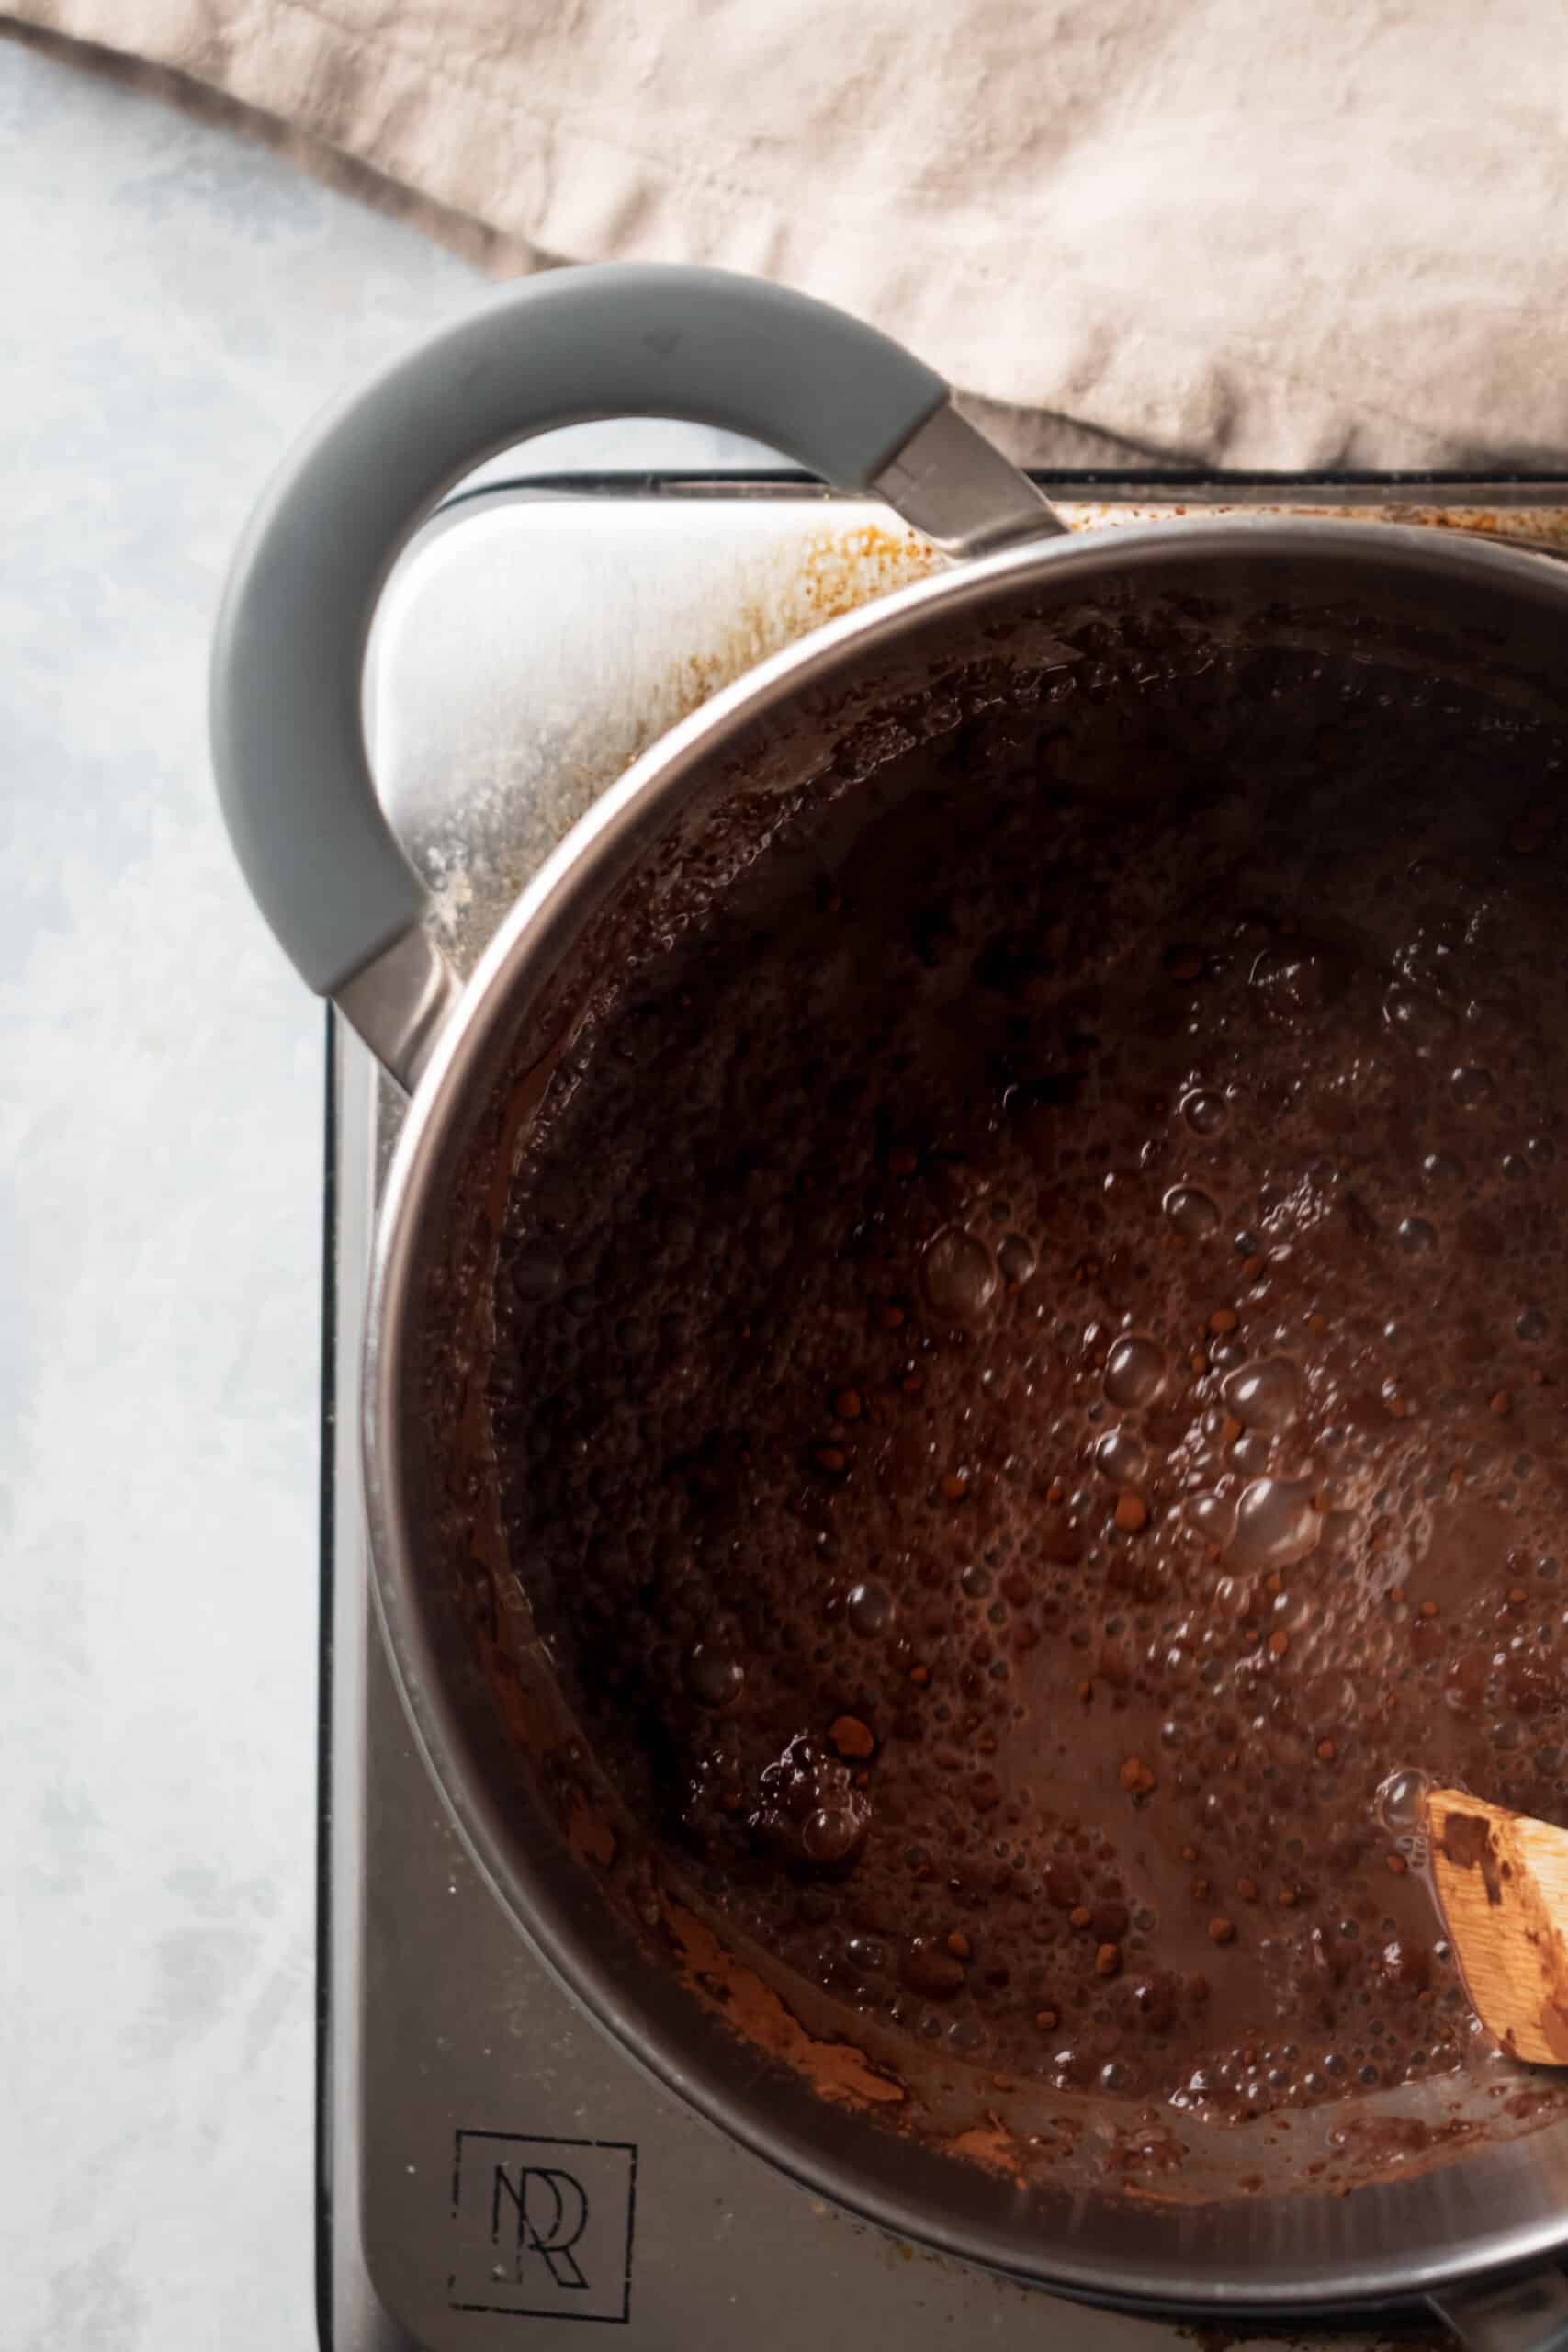 A pot on a burner filled with bubbling hot chocolate.